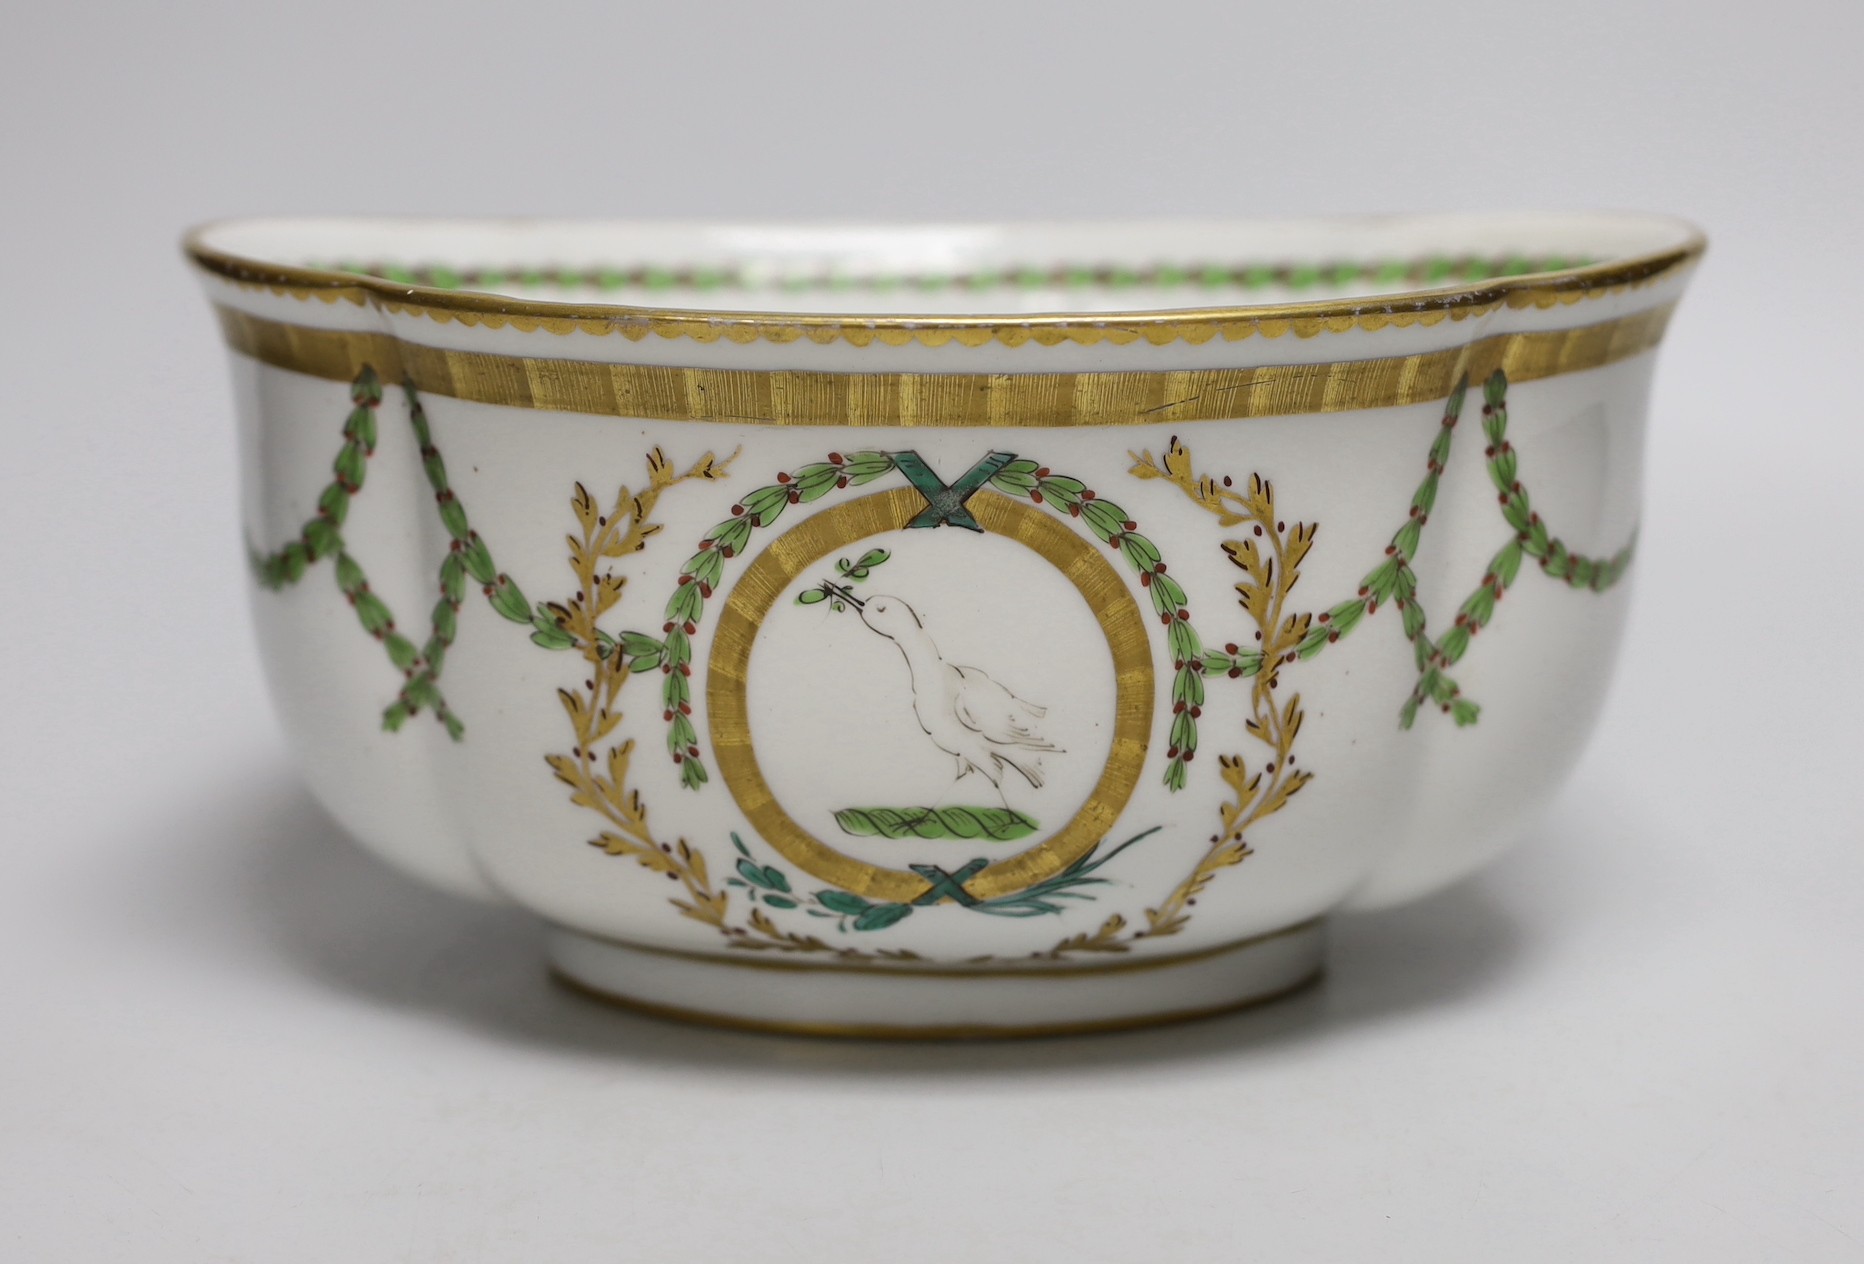 A 19th century porcelain bough pot of large size, painted in neo-classical style